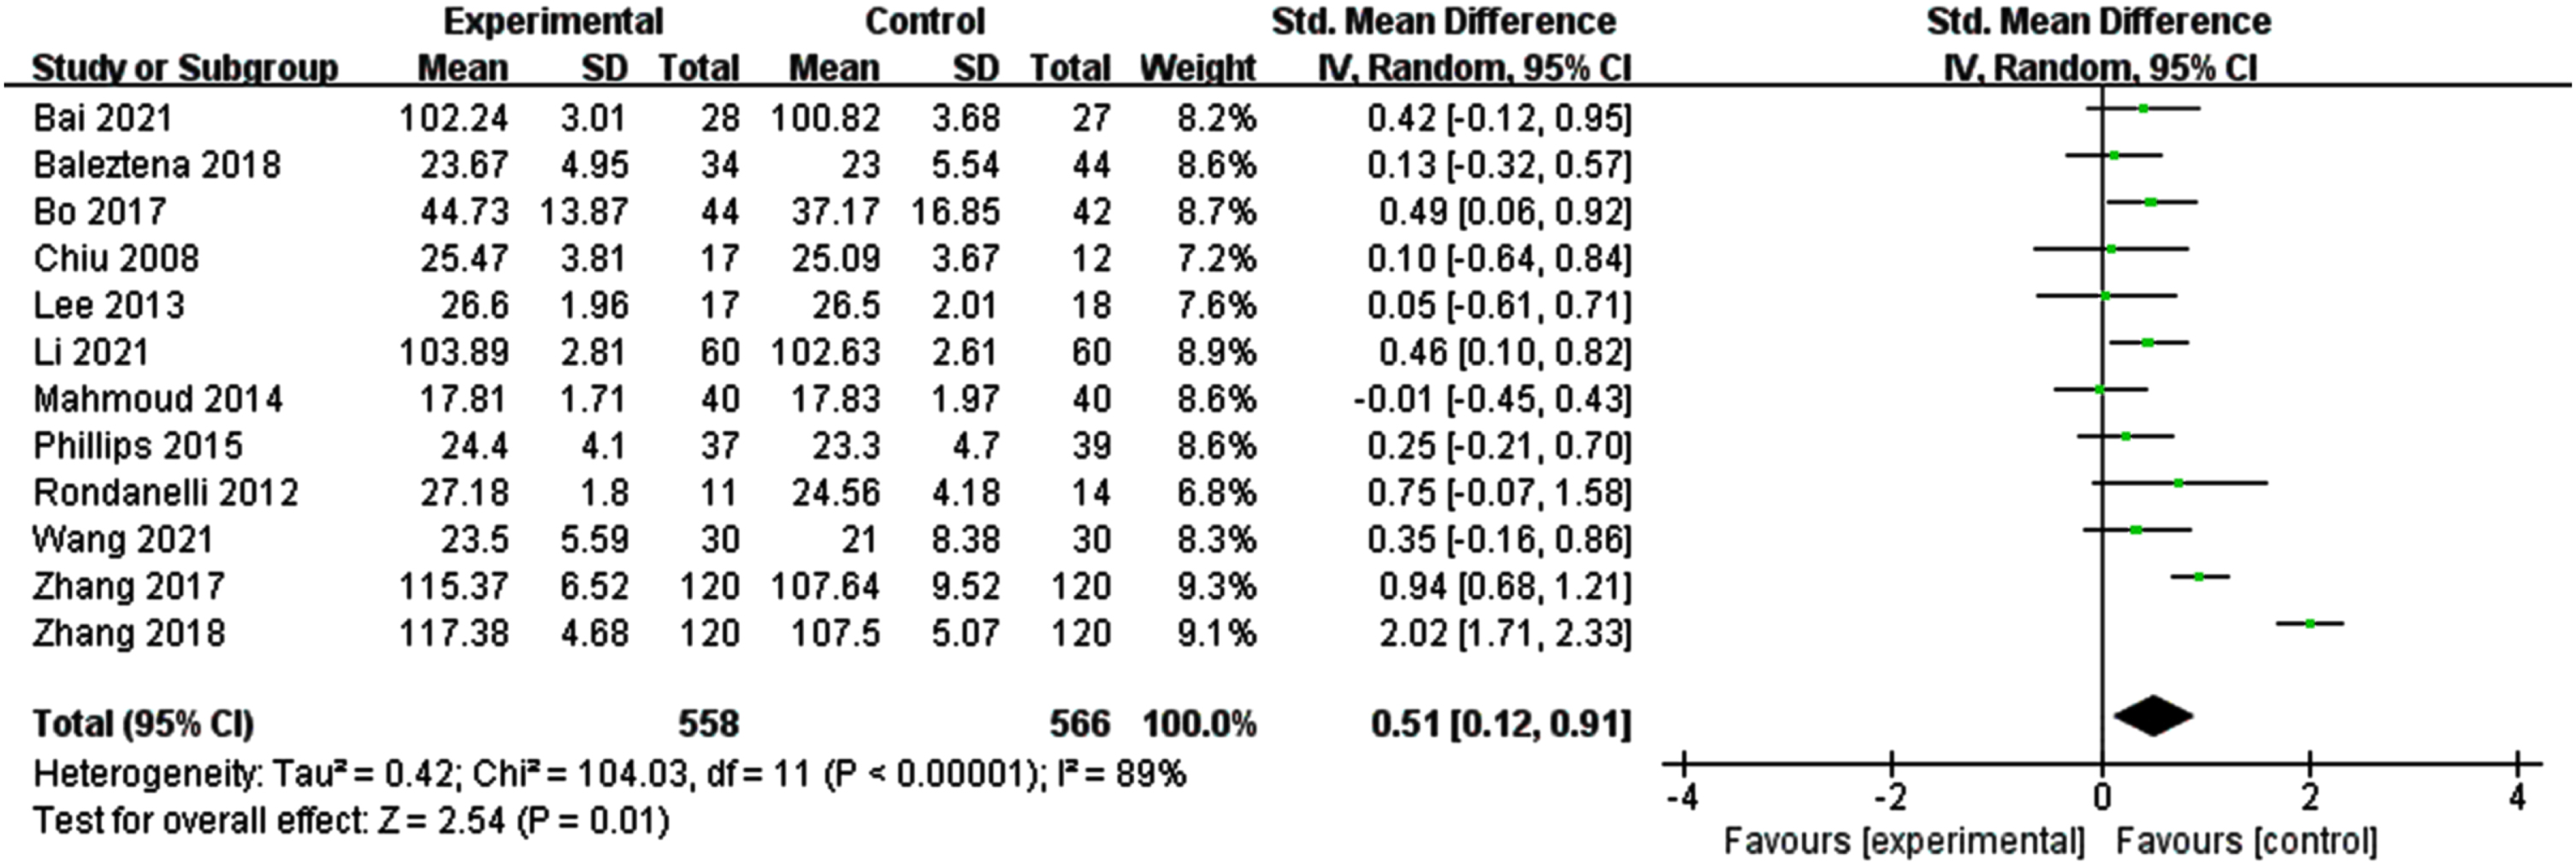 Forest plot for overall cognitive function. Test for heterogeneity I2 = 89%, p < 0.0001, the random effect model was used. The overall effect p = 0.01 <0.05, it shows that the intervention measures have a positive impact on the overall cognitive function of the elderly with MCI.